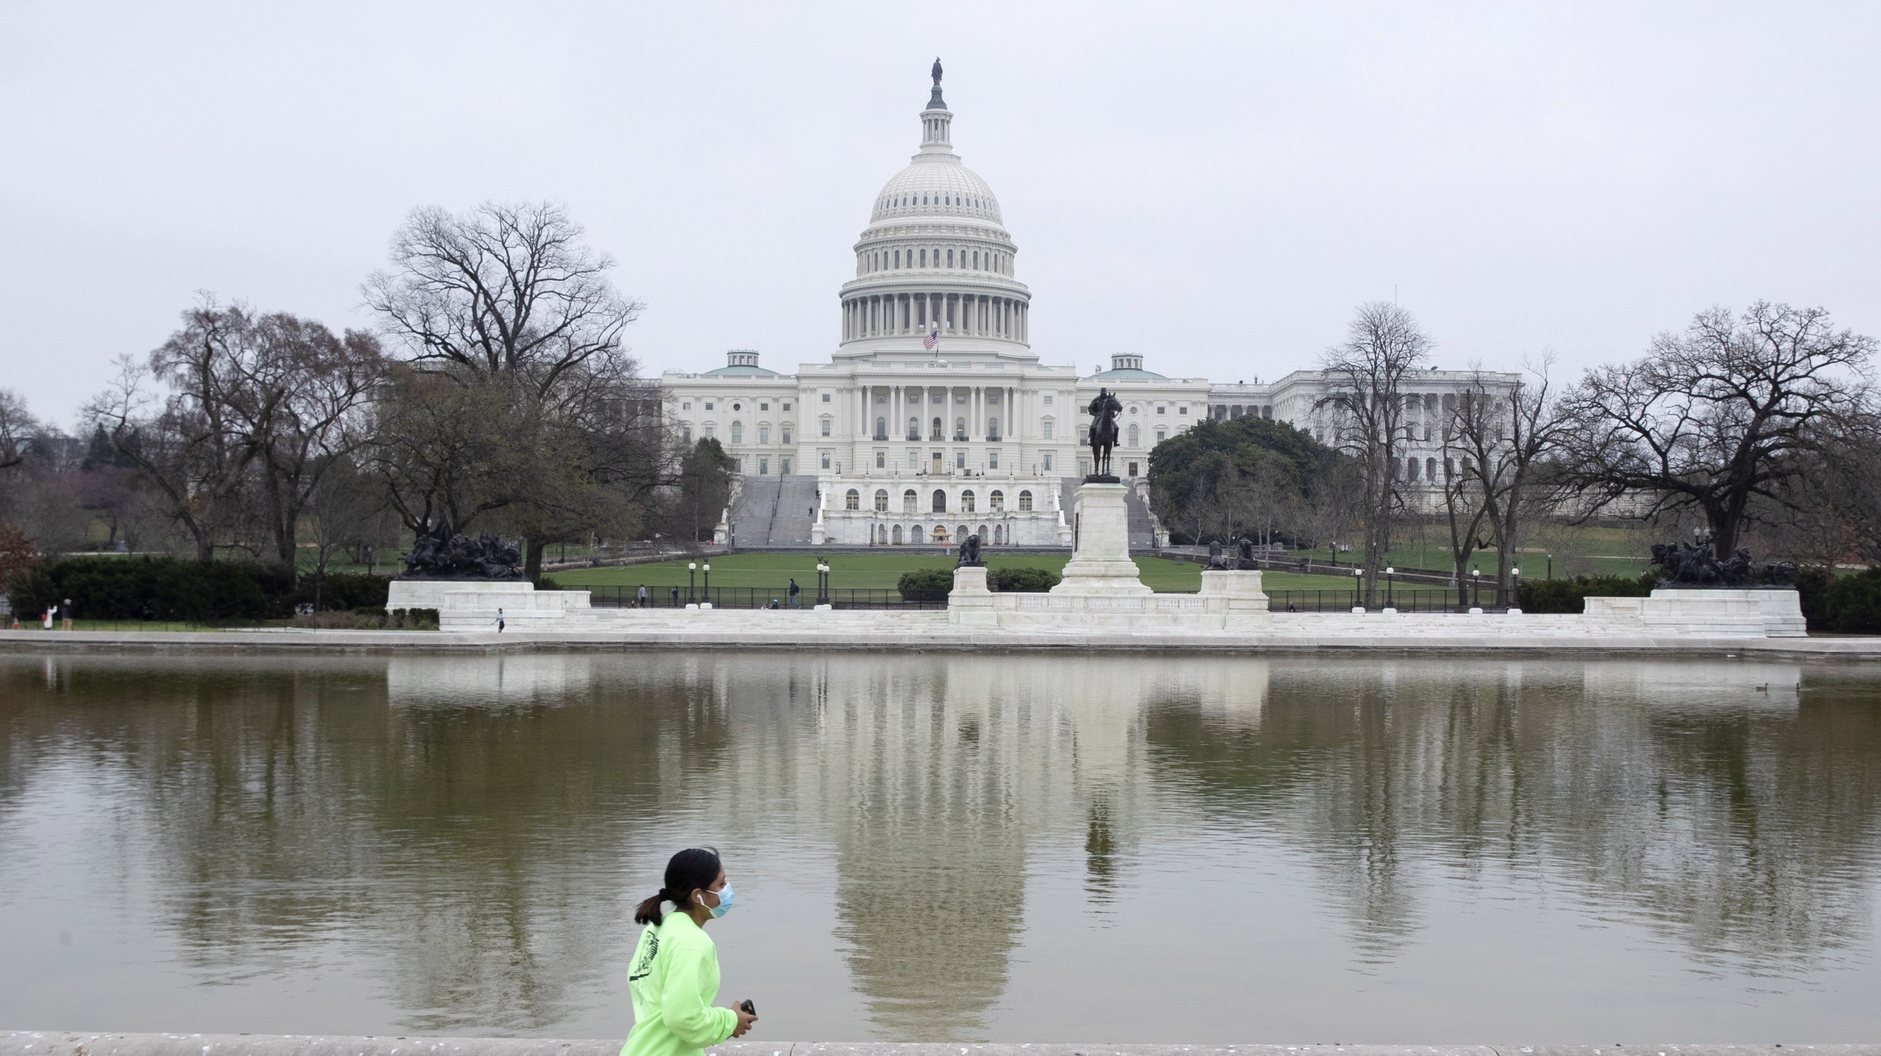 epa09097143 A jogger runs by the Capitol Reflecting Pool on Capitol Hill in Washington, DC, USA, 25 March 2021. The Capitol Reflecting Pool, just west of the US Capitol Building, became available for the public to visit this week for the first time since the 06 January mob riot attack on the Capitol. An inner perimeter security fence around the Capitol remains in place.  EPA/MICHAEL REYNOLDS